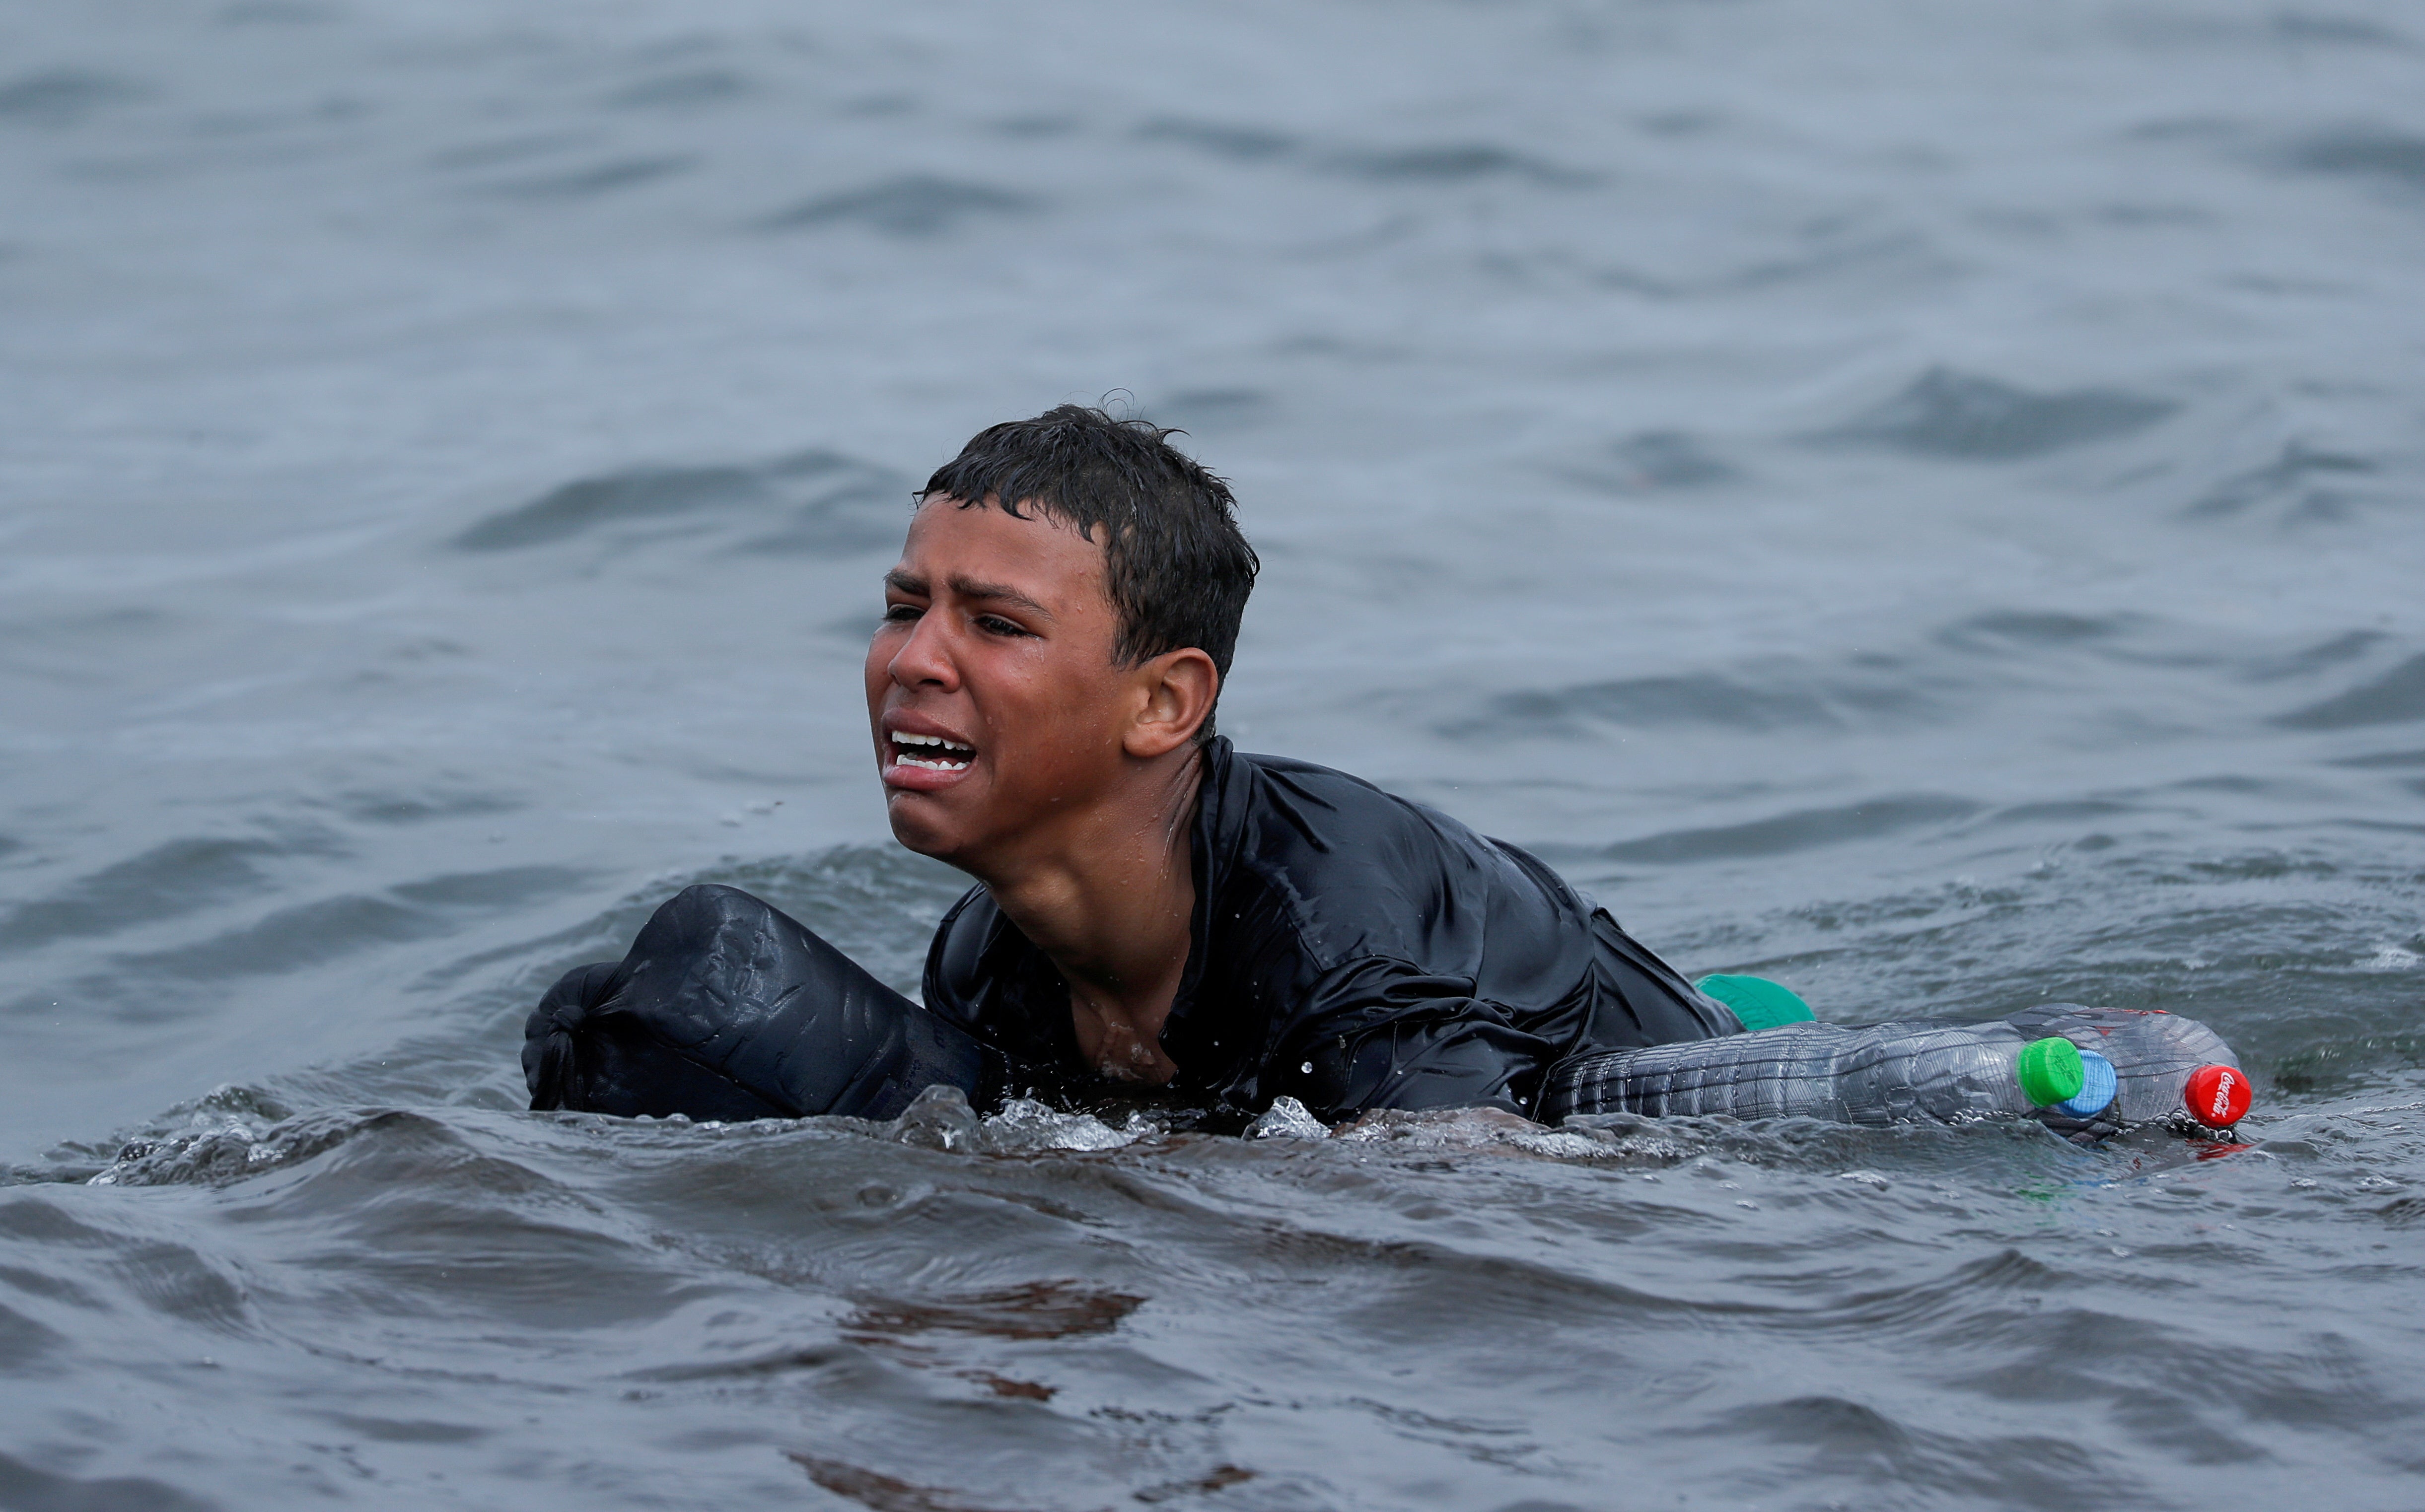 Achraf, 16, cries as he swims using bottles as floats near the fence between the Spanish-Moroccan border, after thousands of migrants swam to Ceuta, Spain, from Morocco